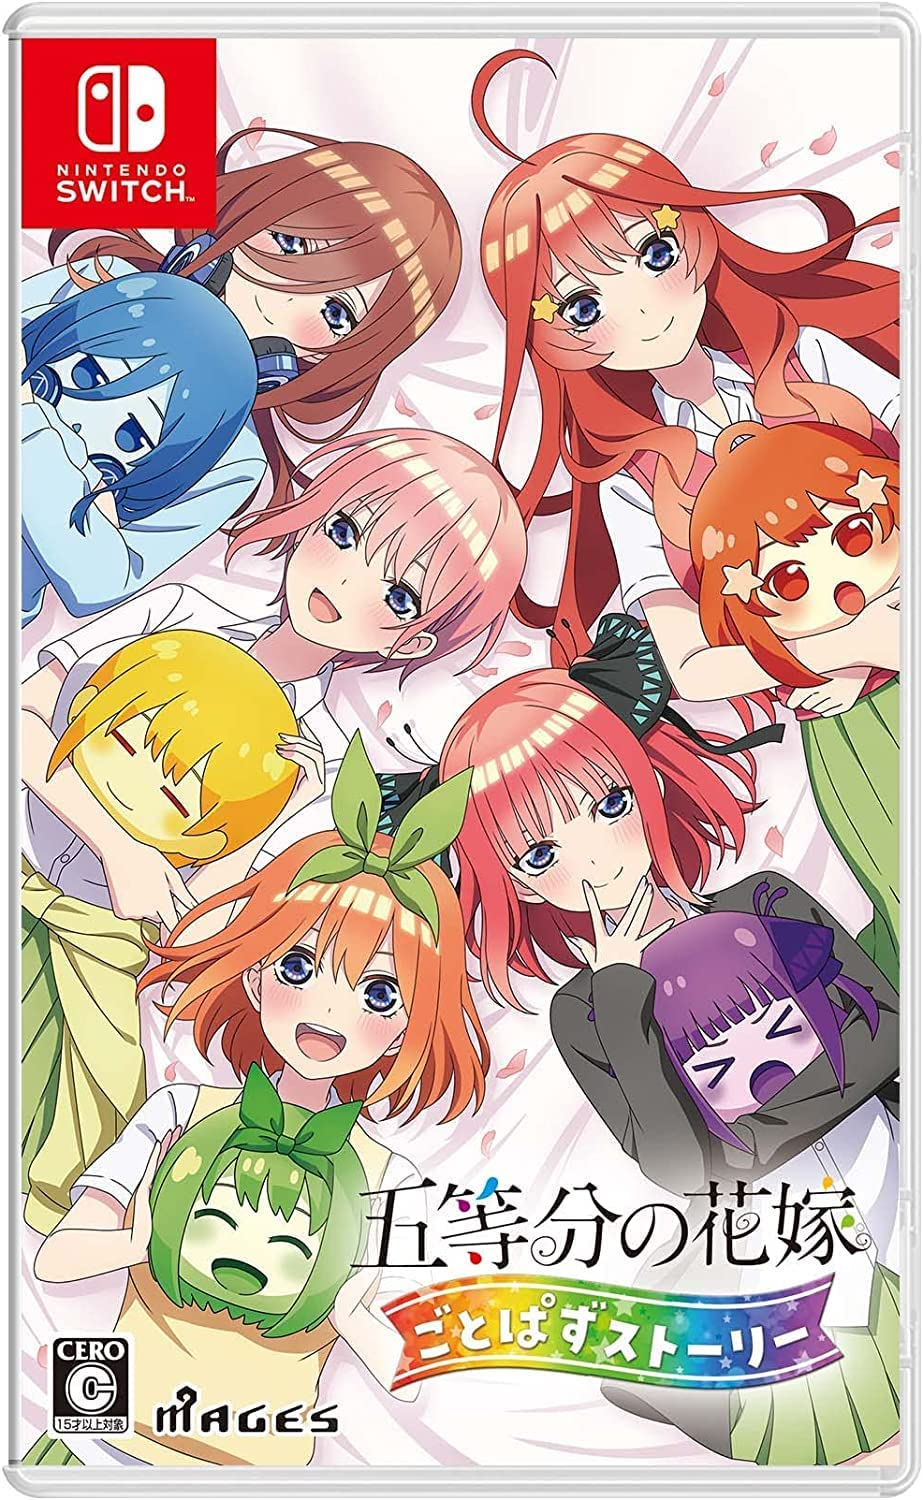 3rd The Quintessential Quintuplets Visual Novel Game to Release on